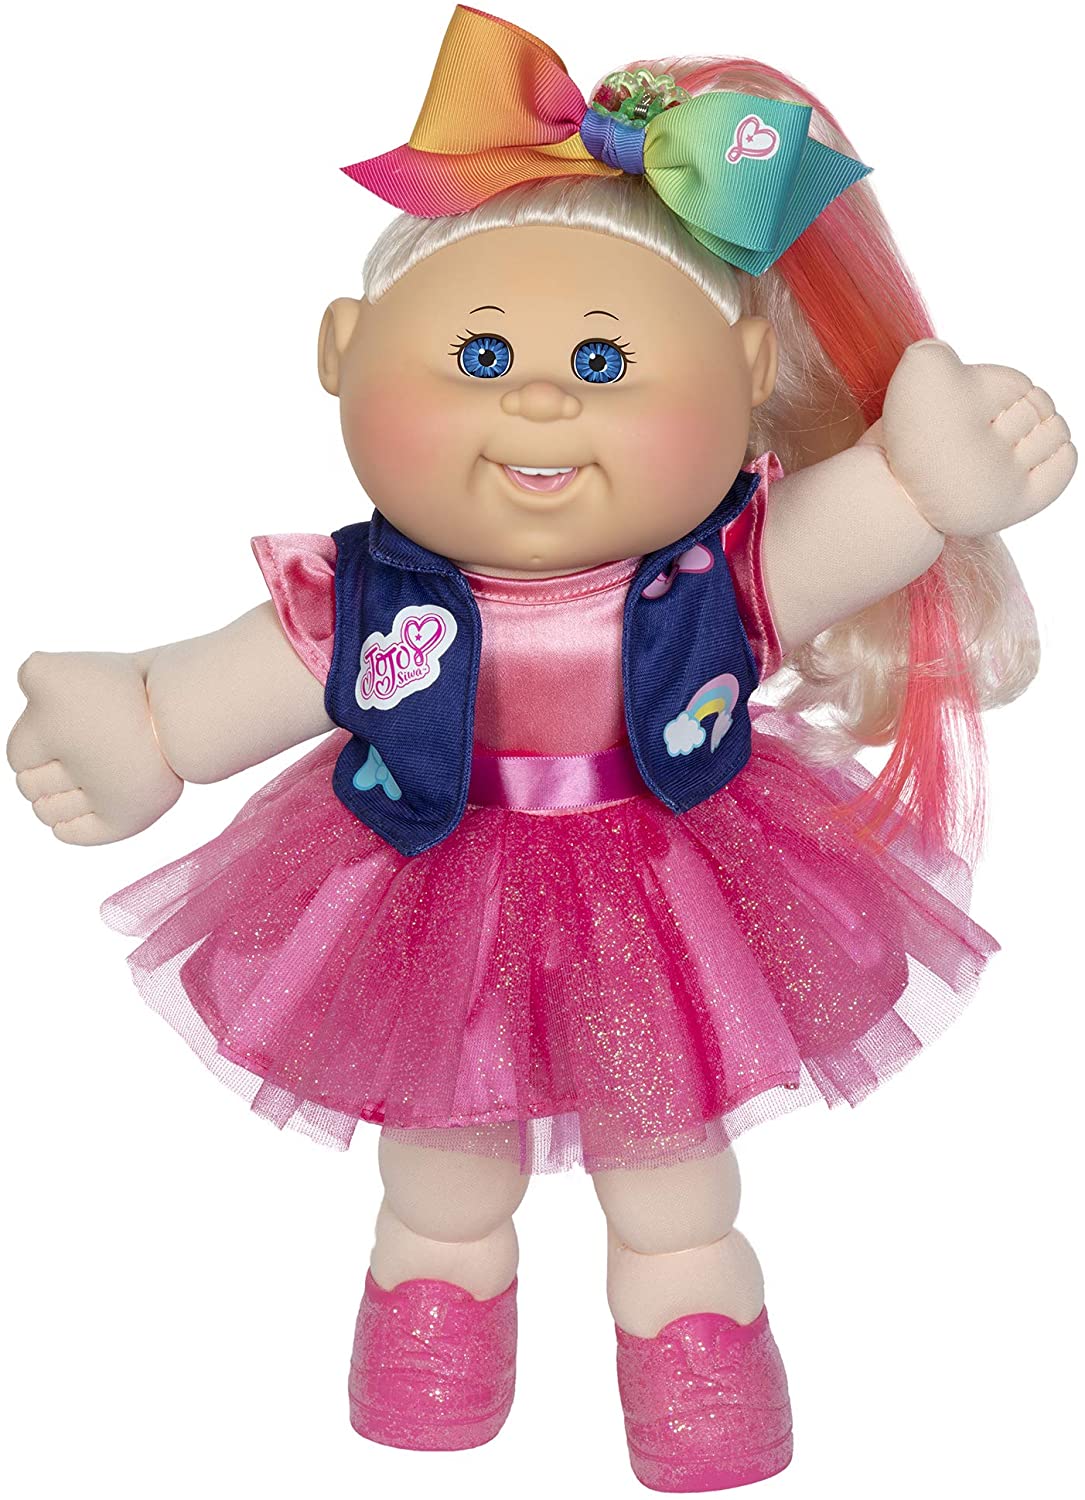 Cabbage Patch Dolls-Most Popular Girl Toys for Kids